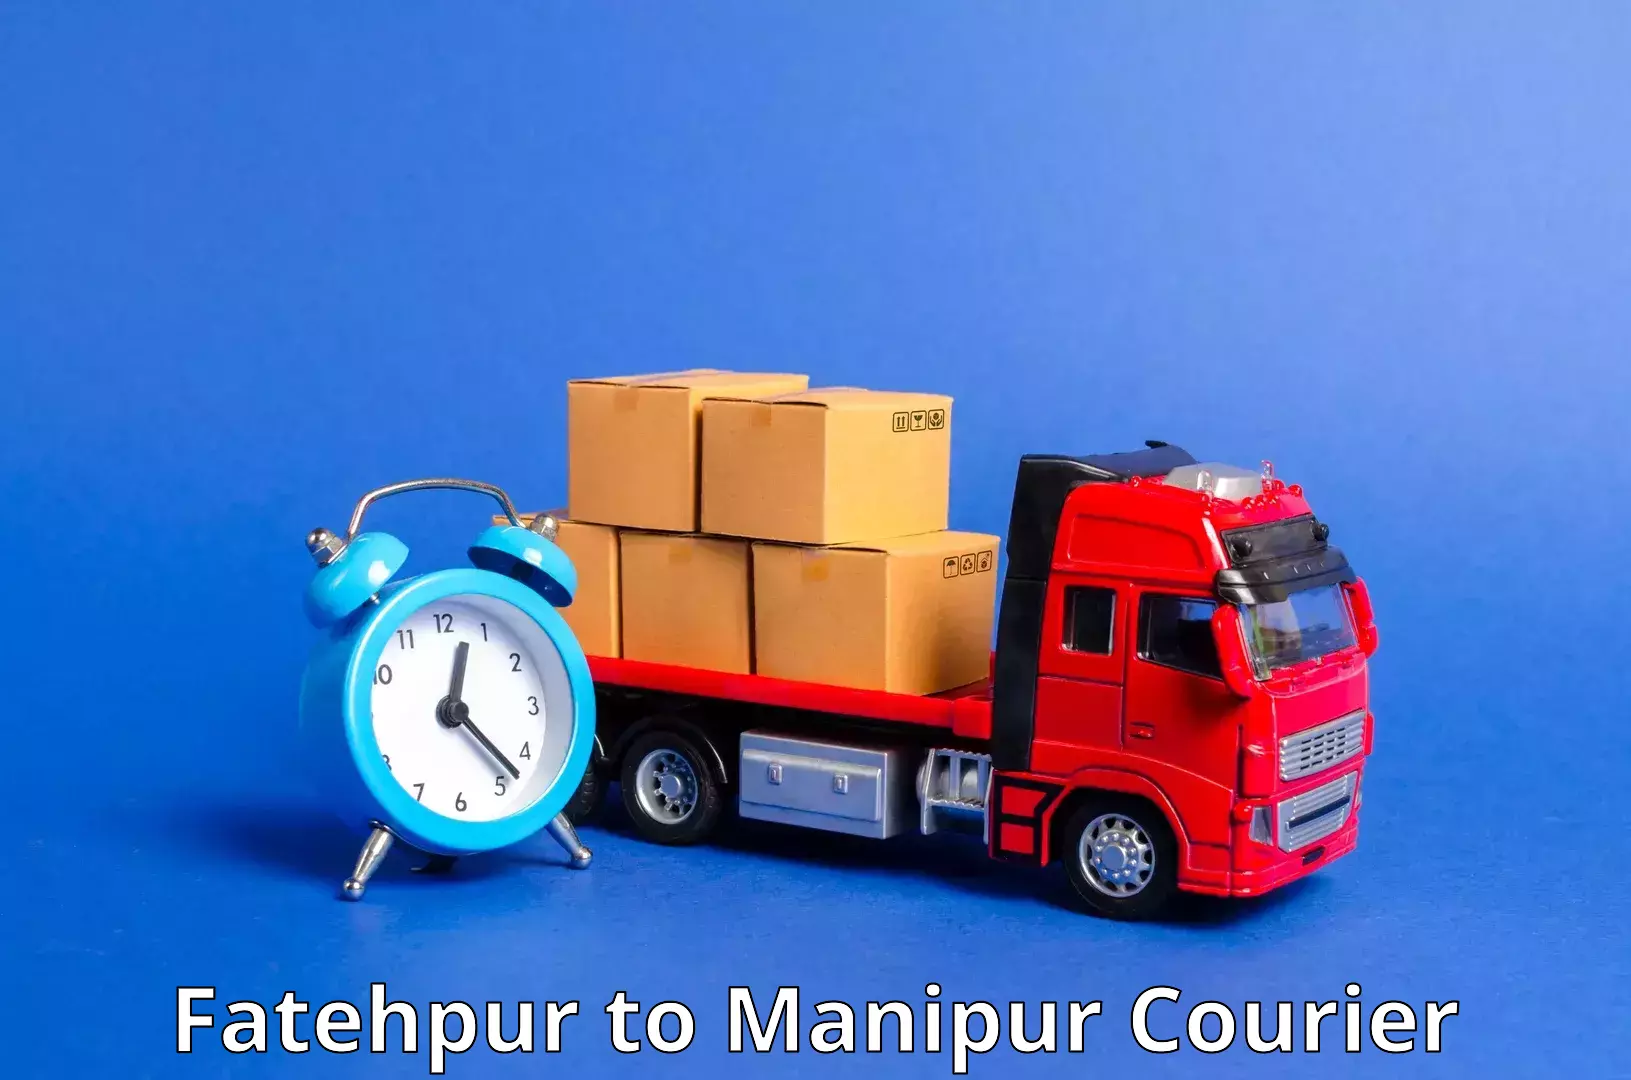 Smart shipping technology Fatehpur to Manipur